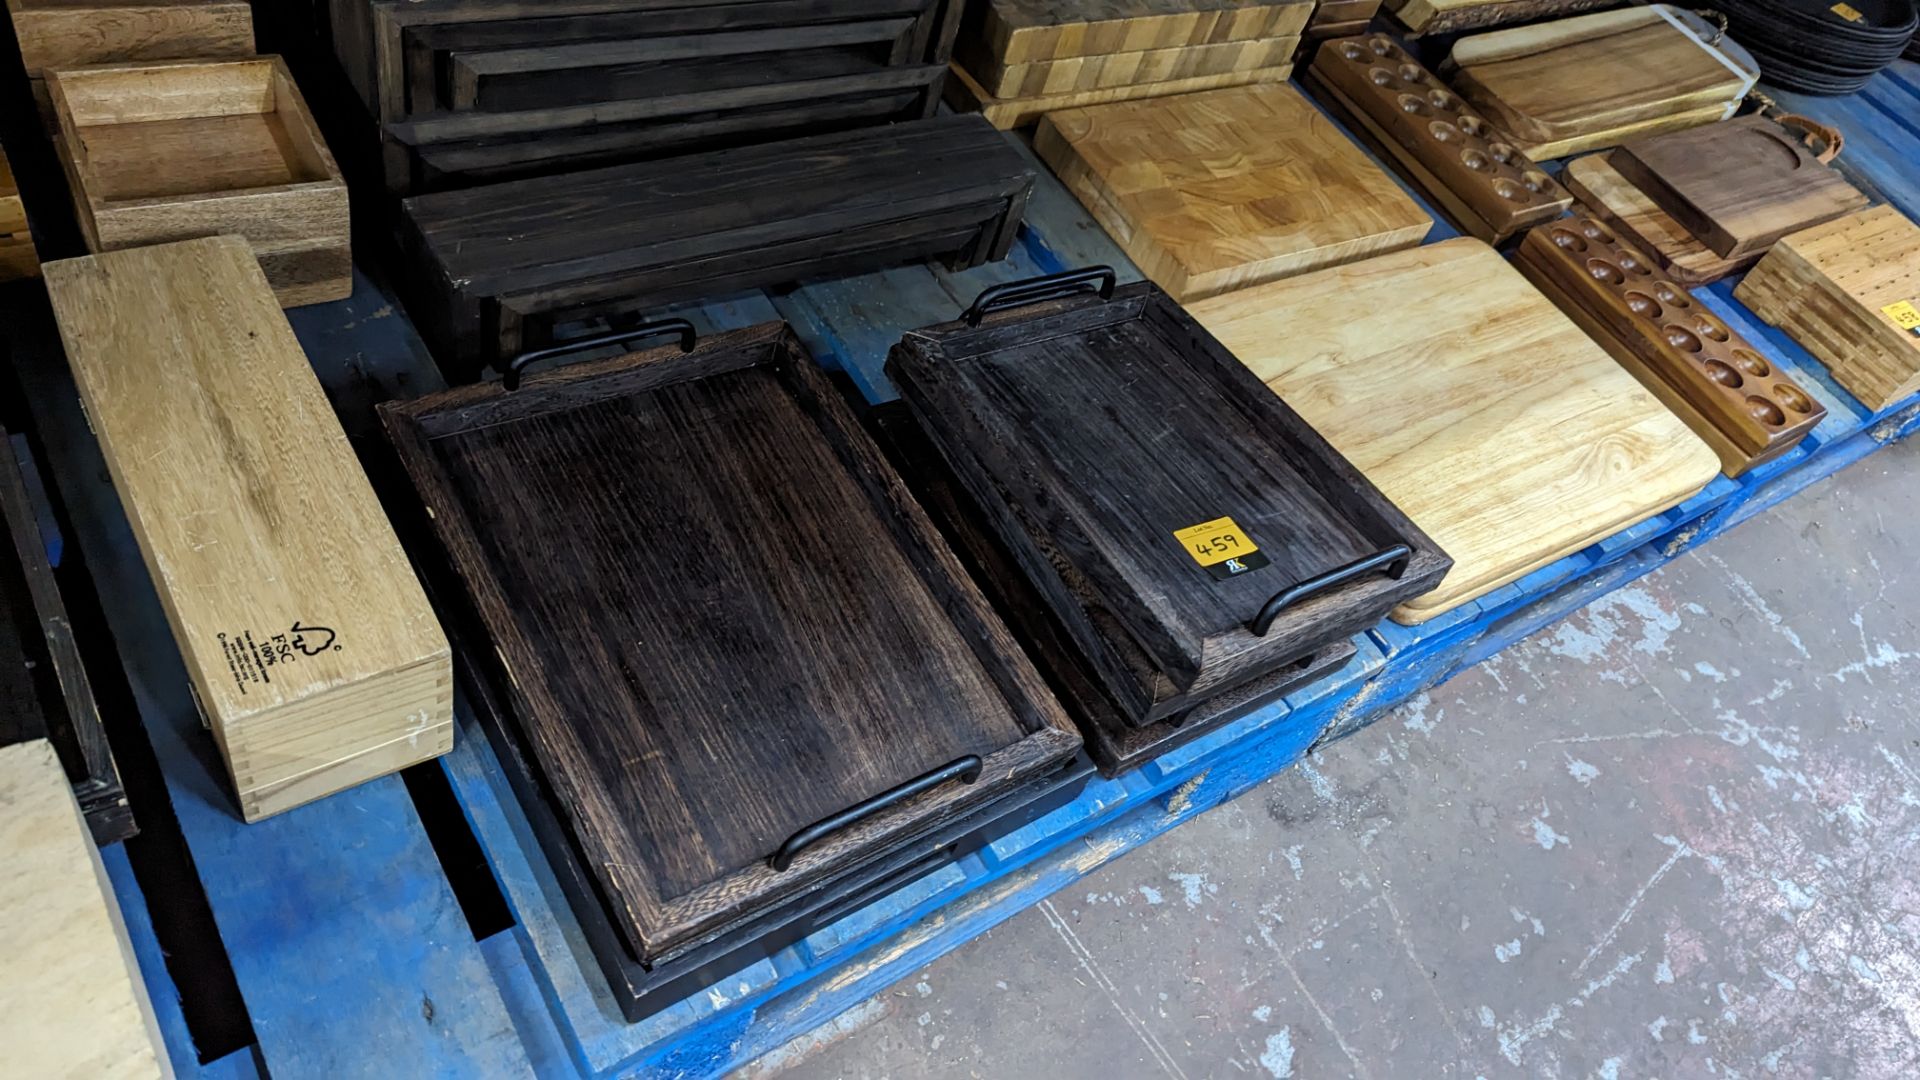 The contents of a pallet of assorted wooden trays, boxes & more - Image 5 of 8